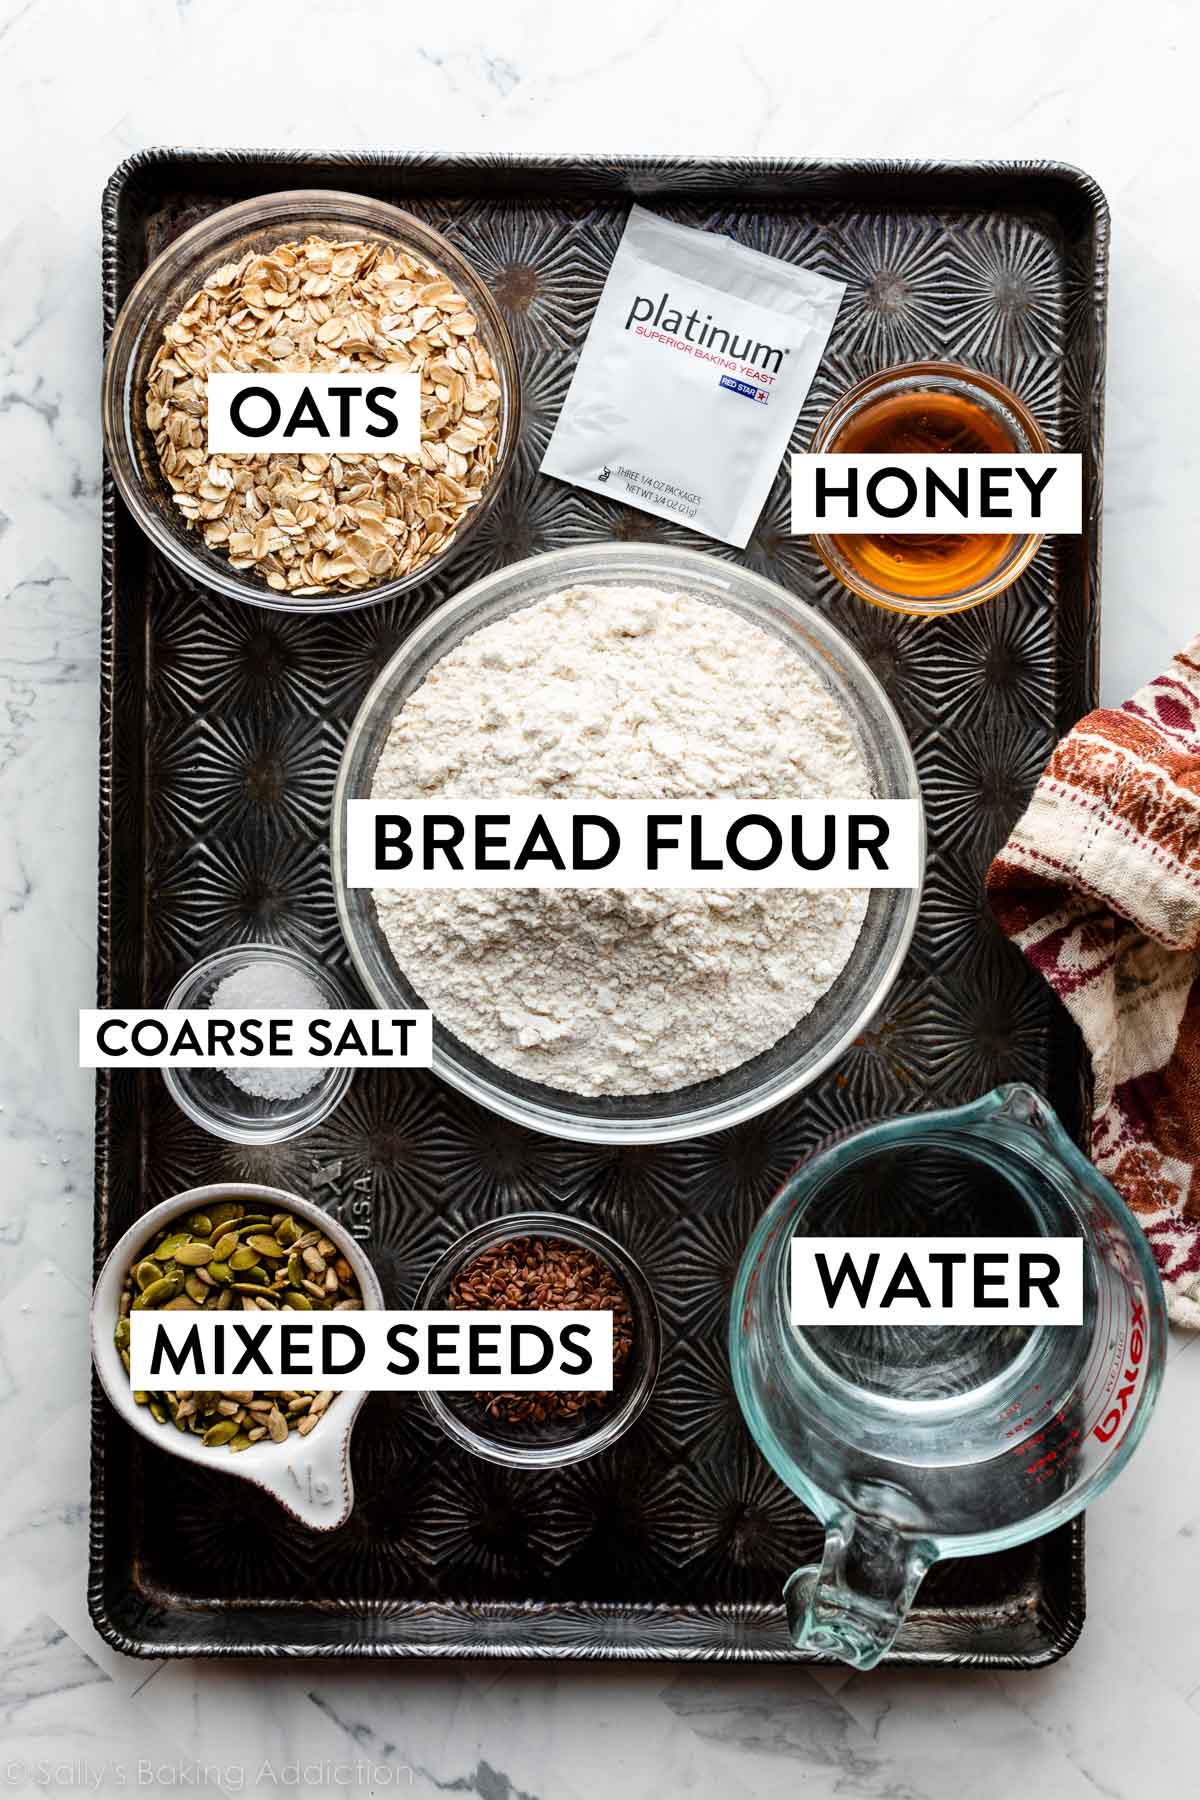 bread flour, honey, yeast, oats, seeds, and other ingredients on baking tray.